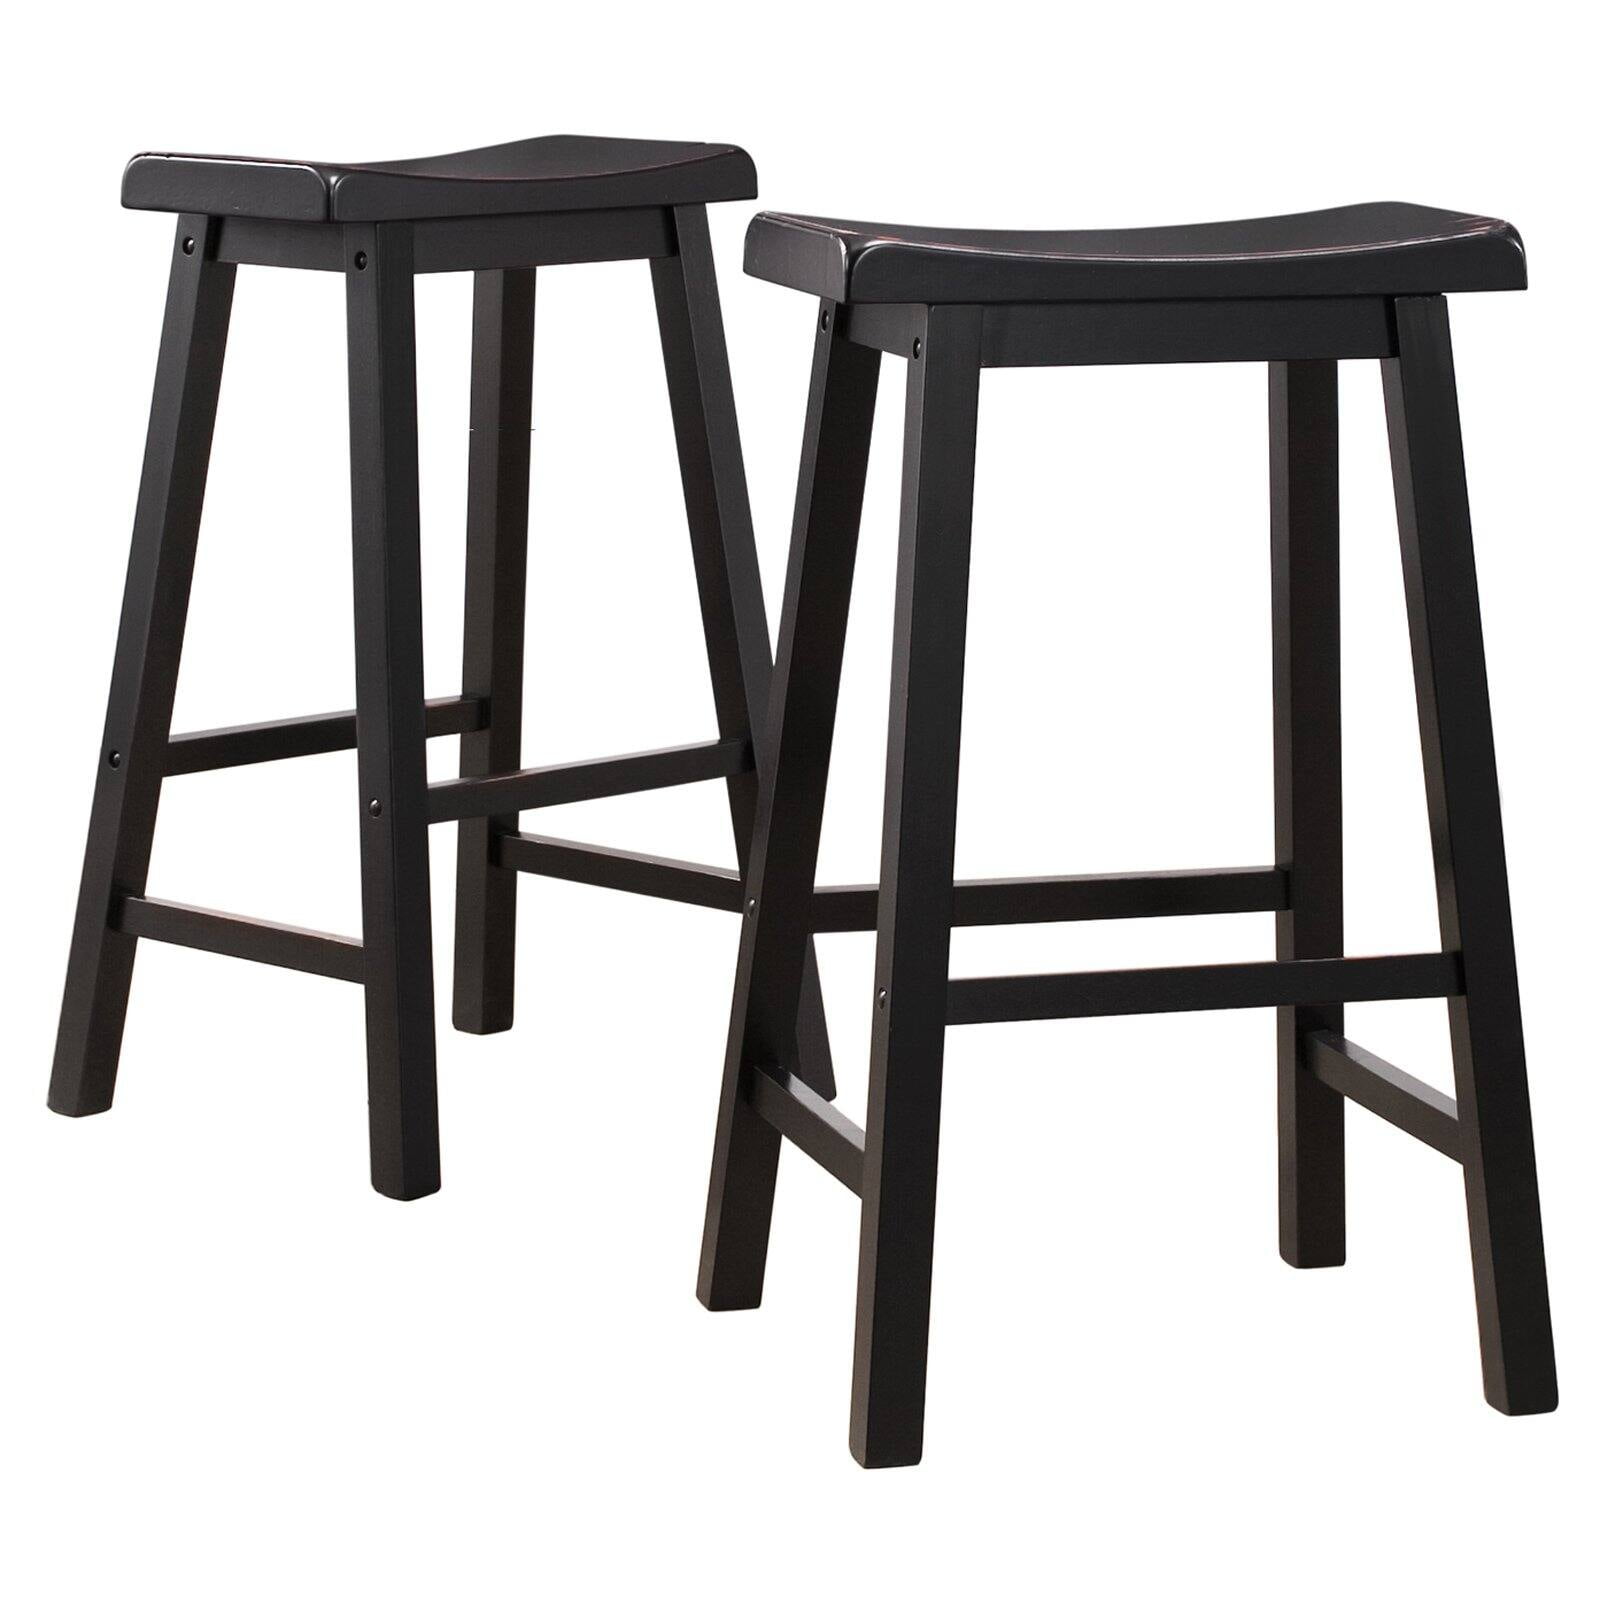 2 x Hand Painted Wooden Bar Stools Black 